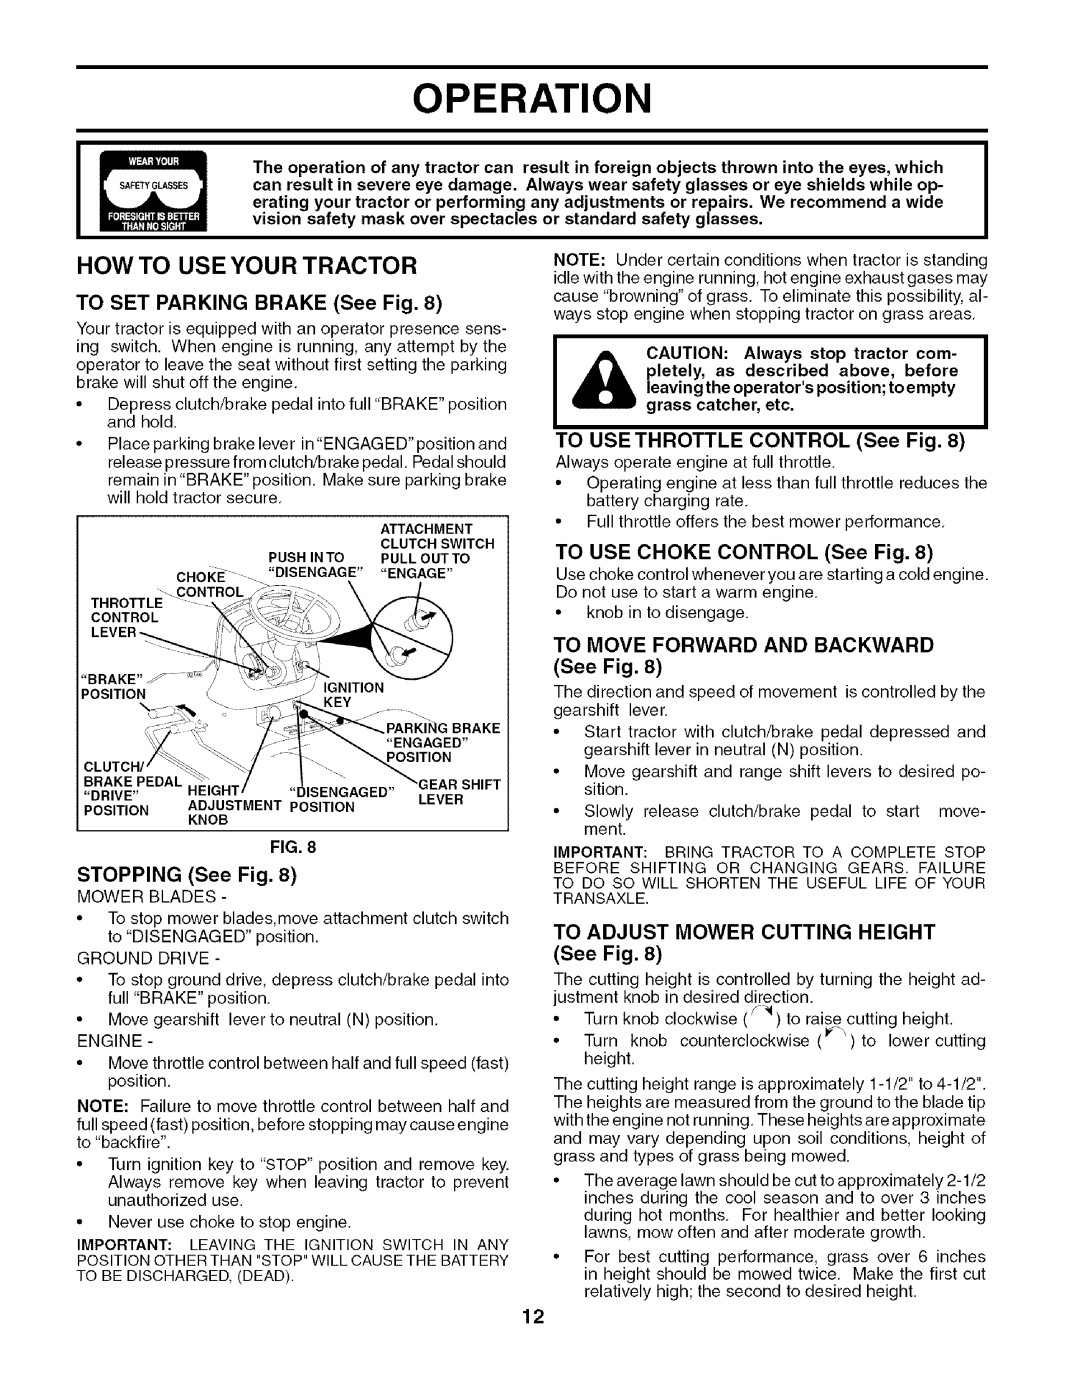 Husqvarna 917.27909 owner manual HOW to USE Your Tractor 